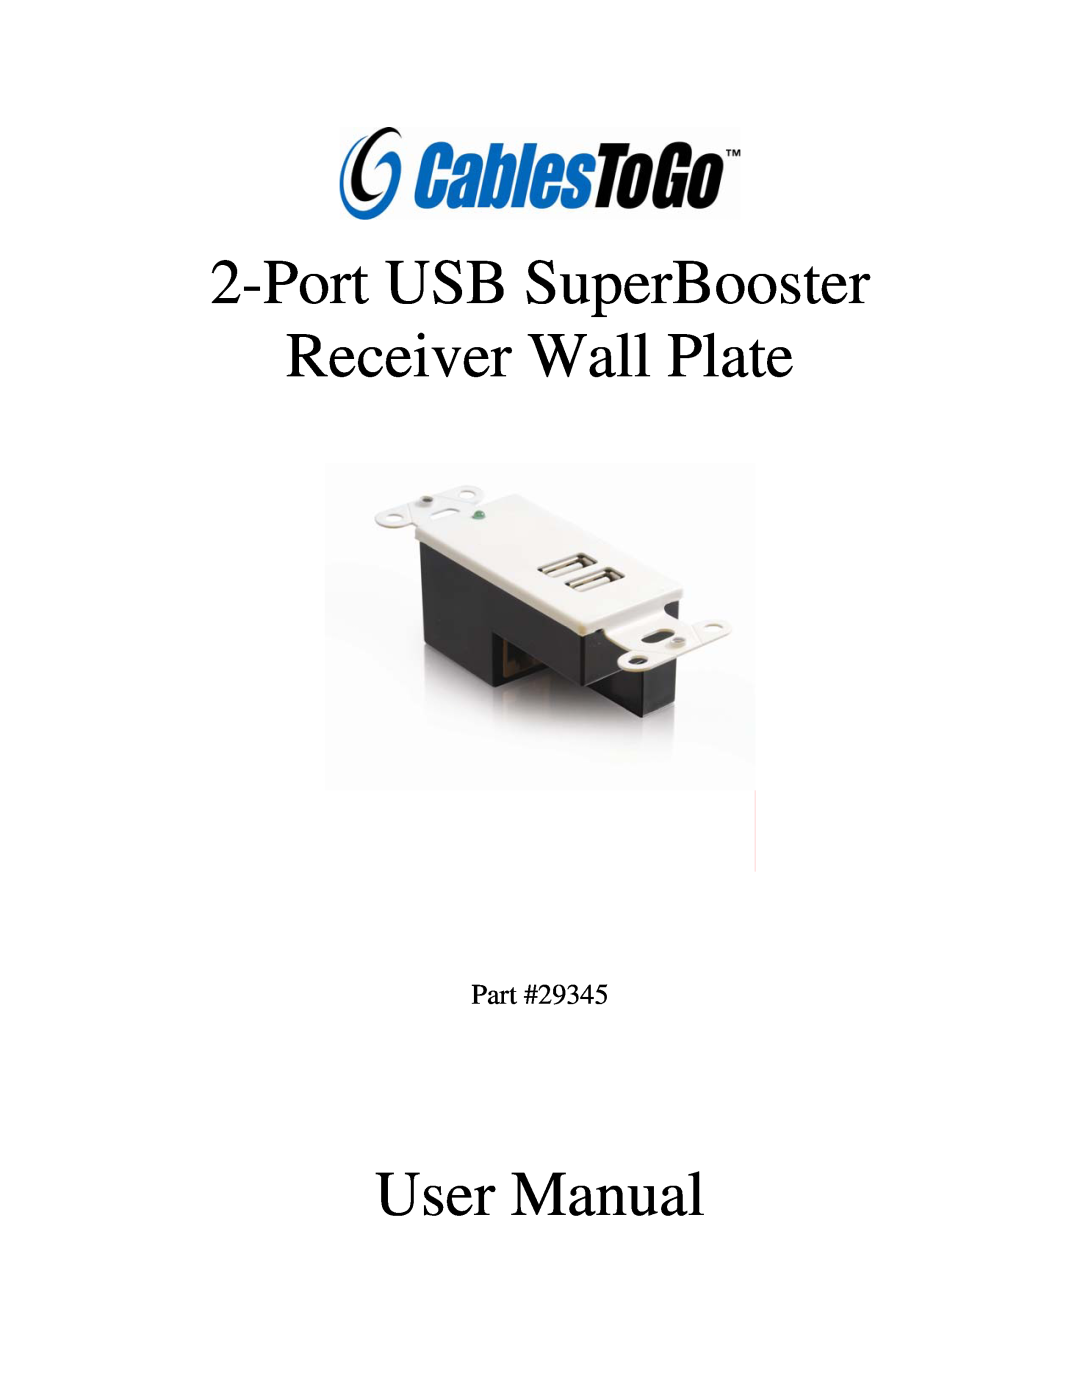 Cables to Go 29345 user manual Port USB SuperBooster Receiver Wall Plate, User Manual 